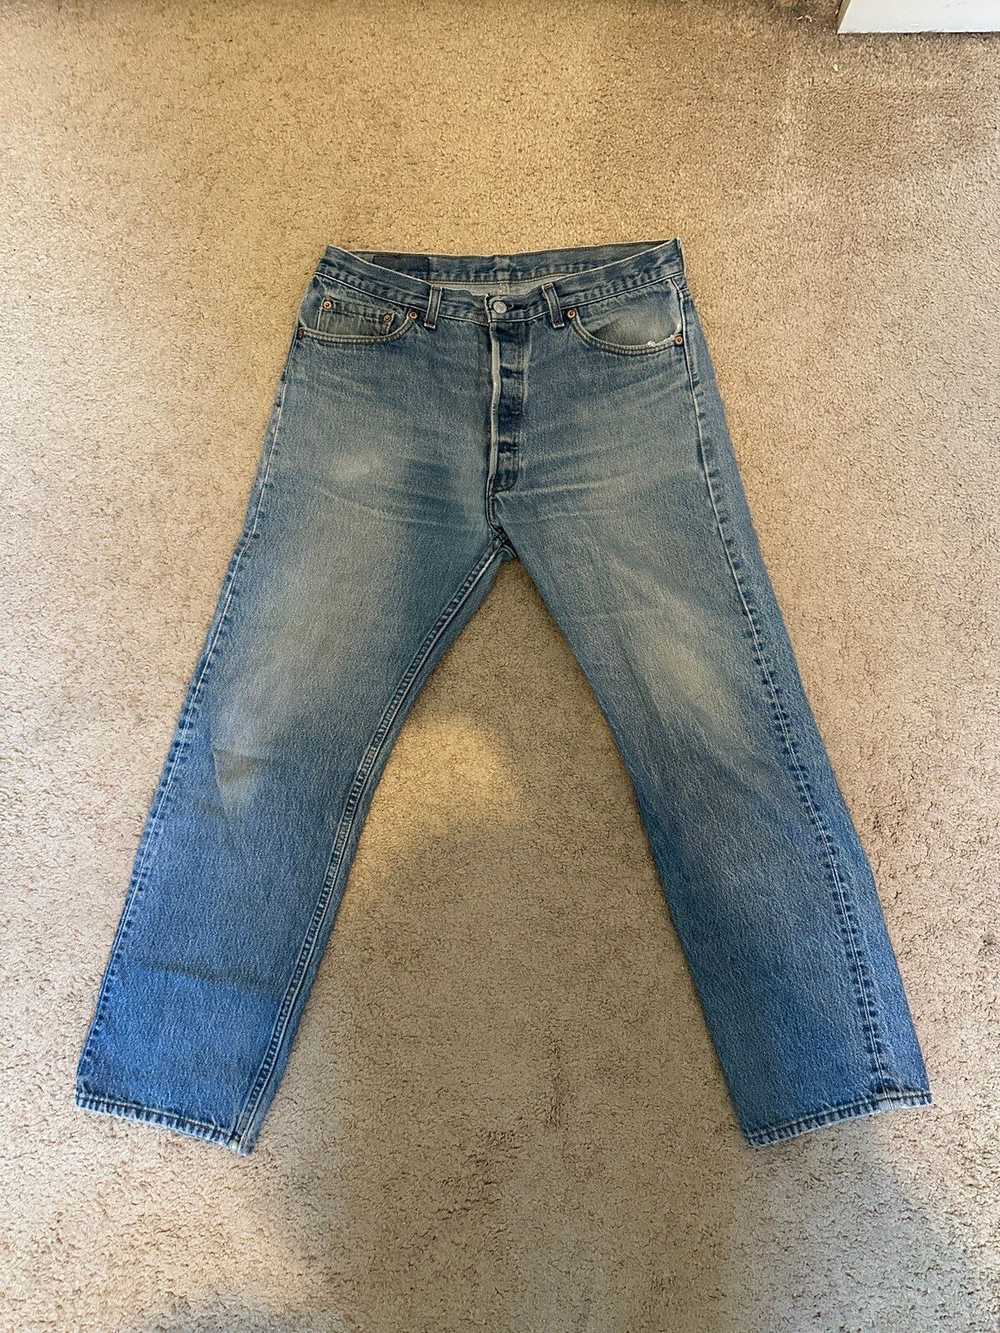 Levi's Vintage Levi’s 501 Made in USA 90’s - image 1